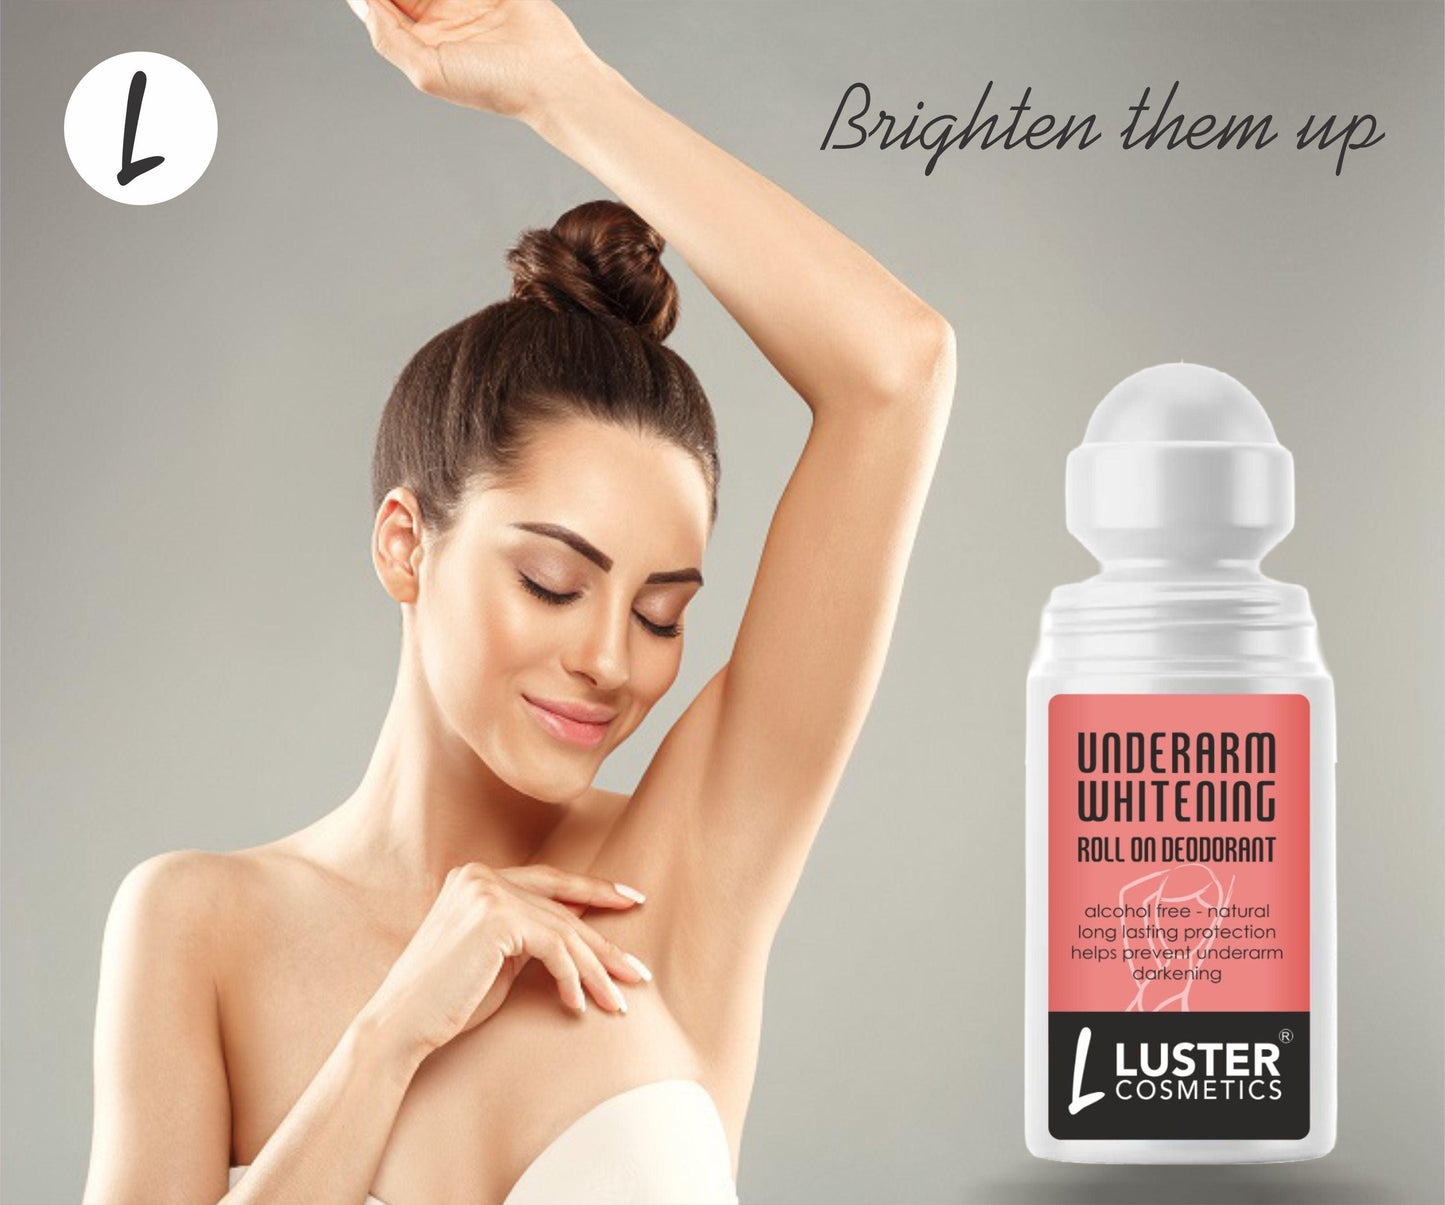 Luster Cosmetics Whitening Underarm Roll On Deodorant | Alcohol free | Helps Prevent Underarm Darkening | Helps Brighten & Lighten Armpits | Roll On Deodorant For Men & Women -50ml - Image #2